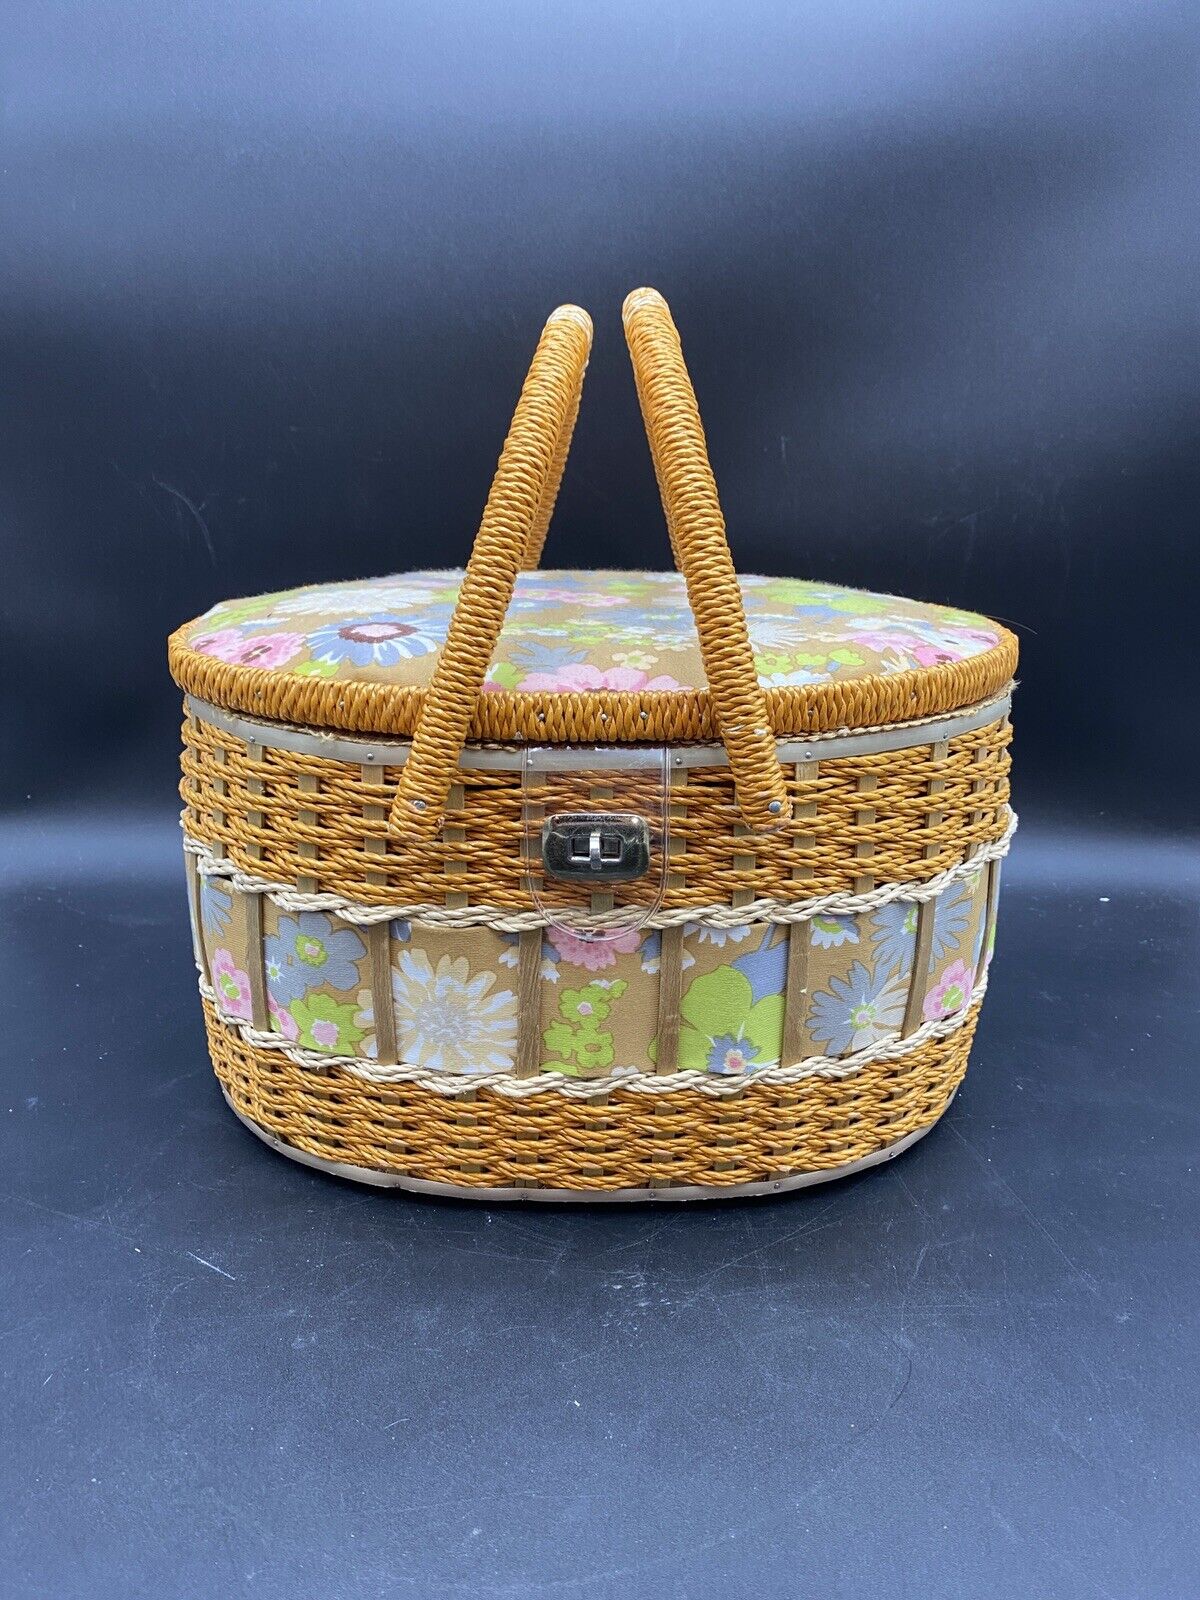 Vintage Sears Best Large Sewing Basket with Tray - Woven Wicker Pink Floral